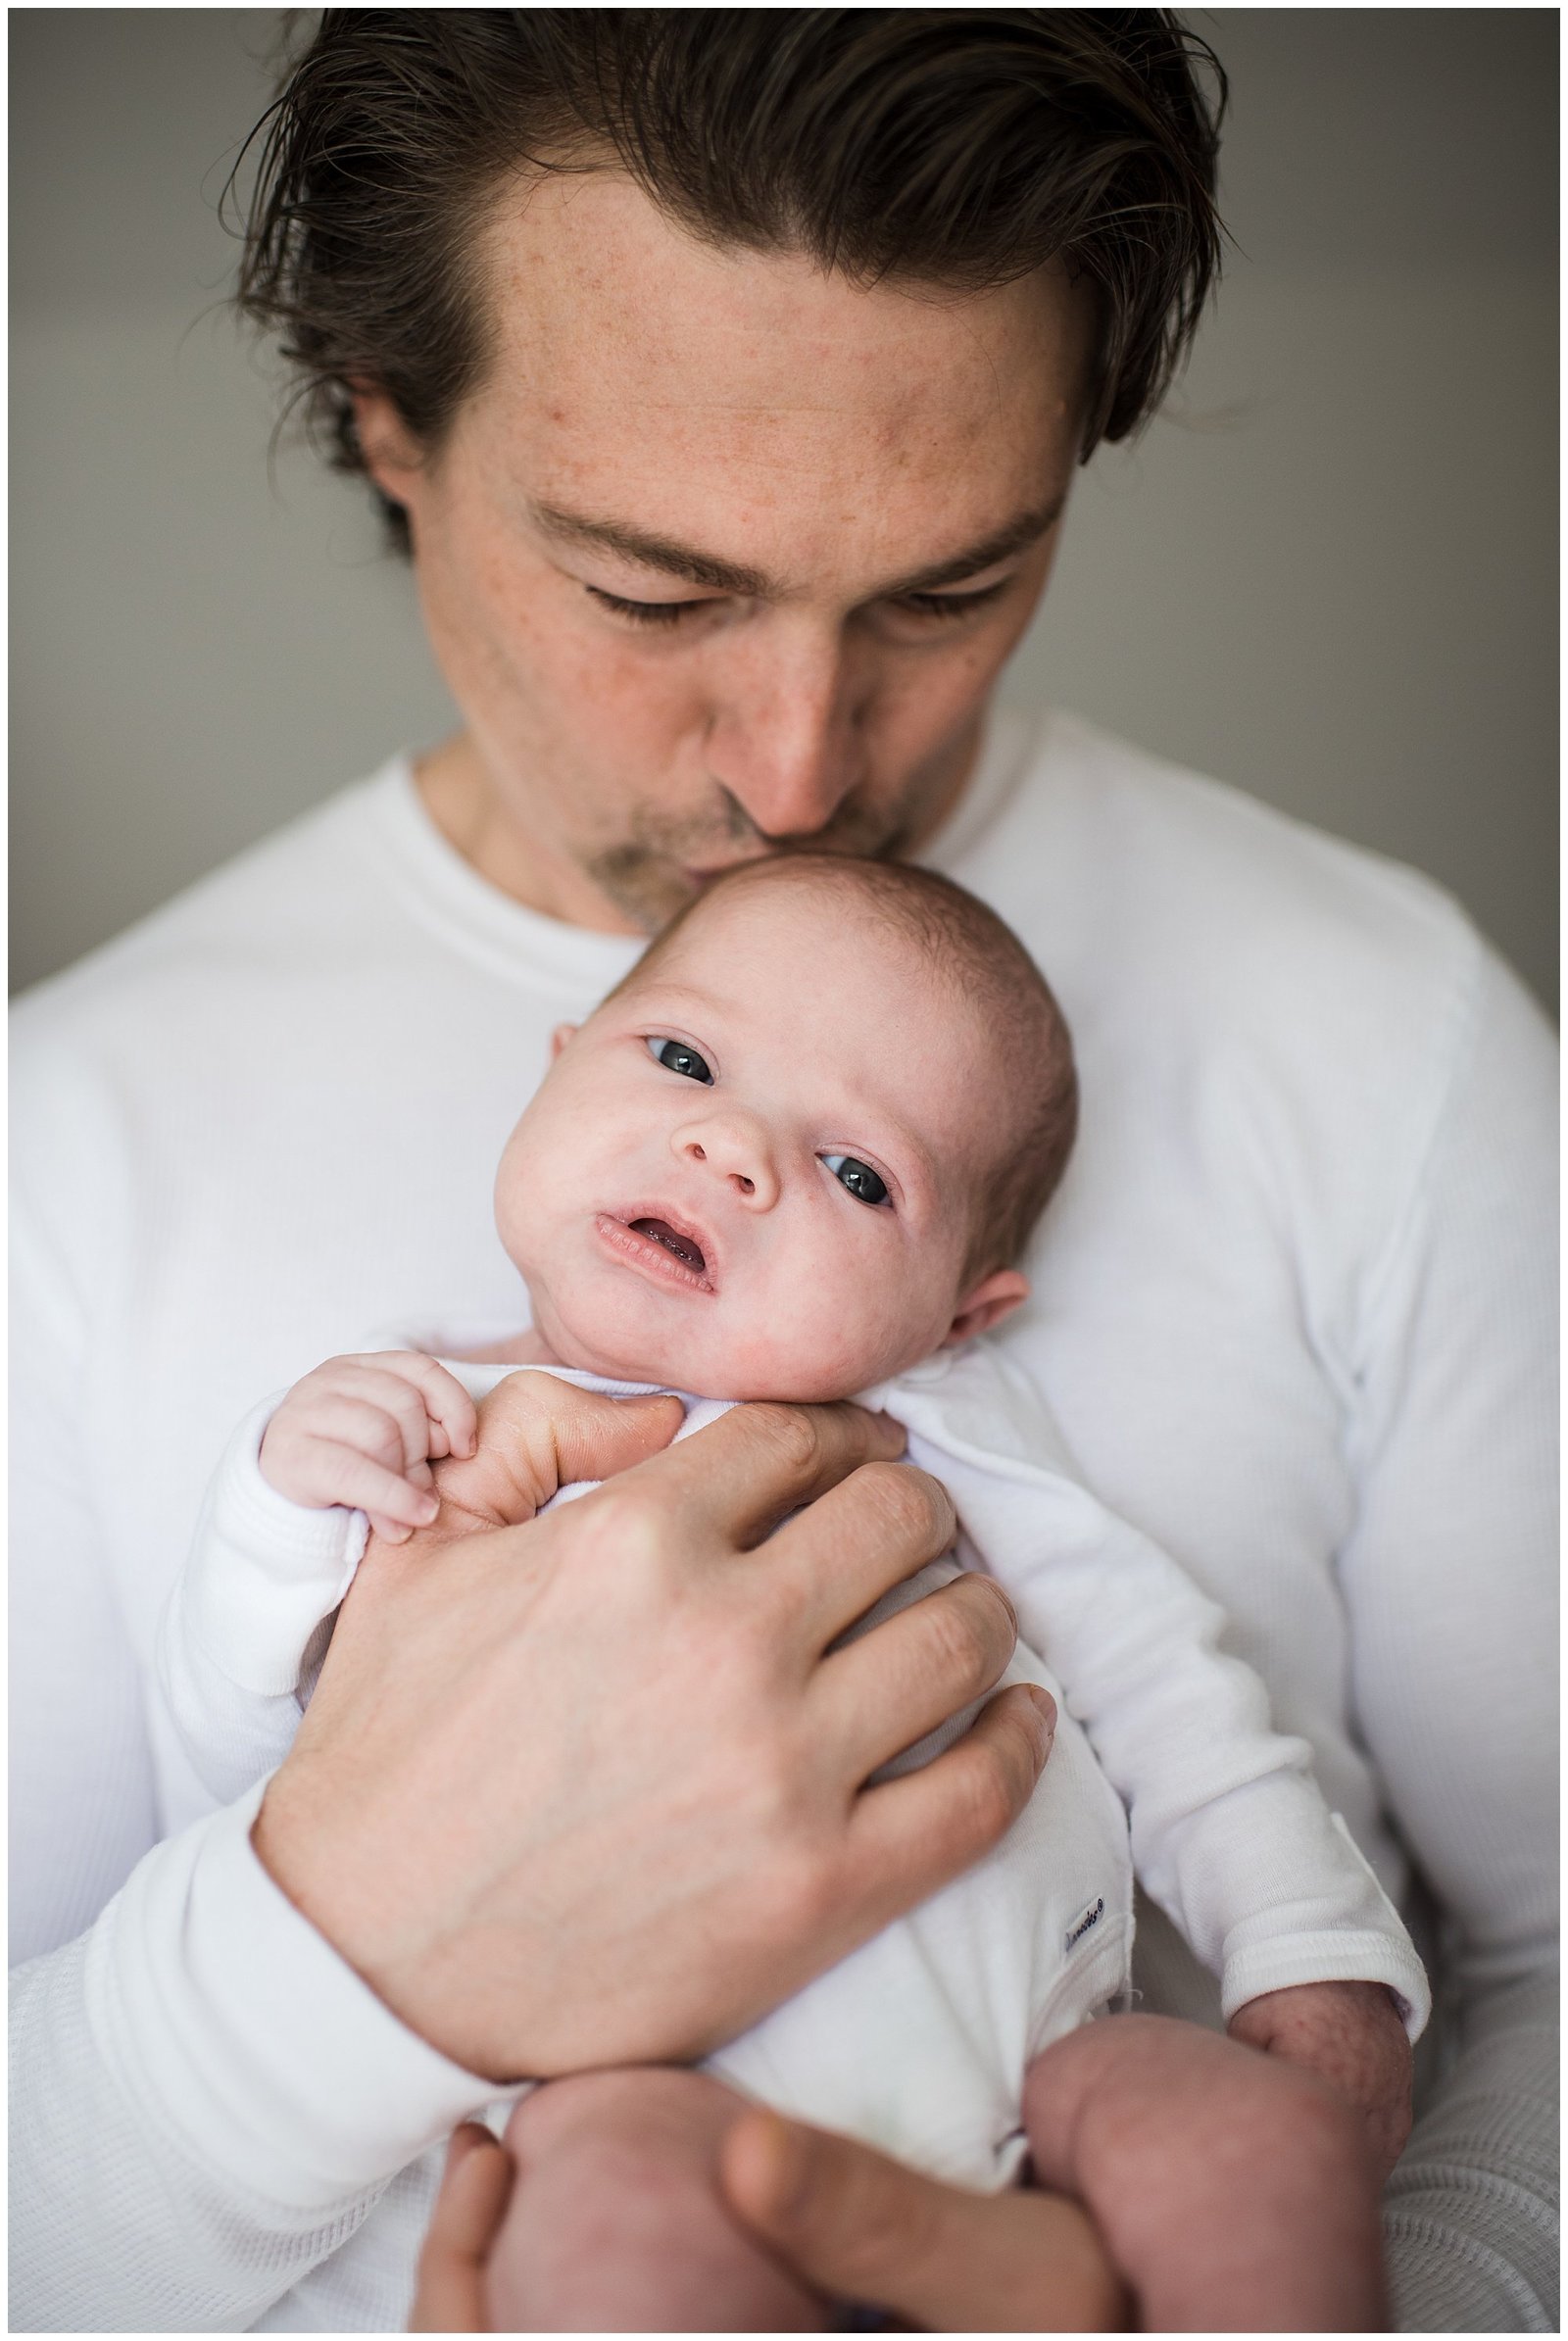 dad kising newborn baby girl in home lifestyle newborn photo session Emily Ann Photography Seattle Photographer